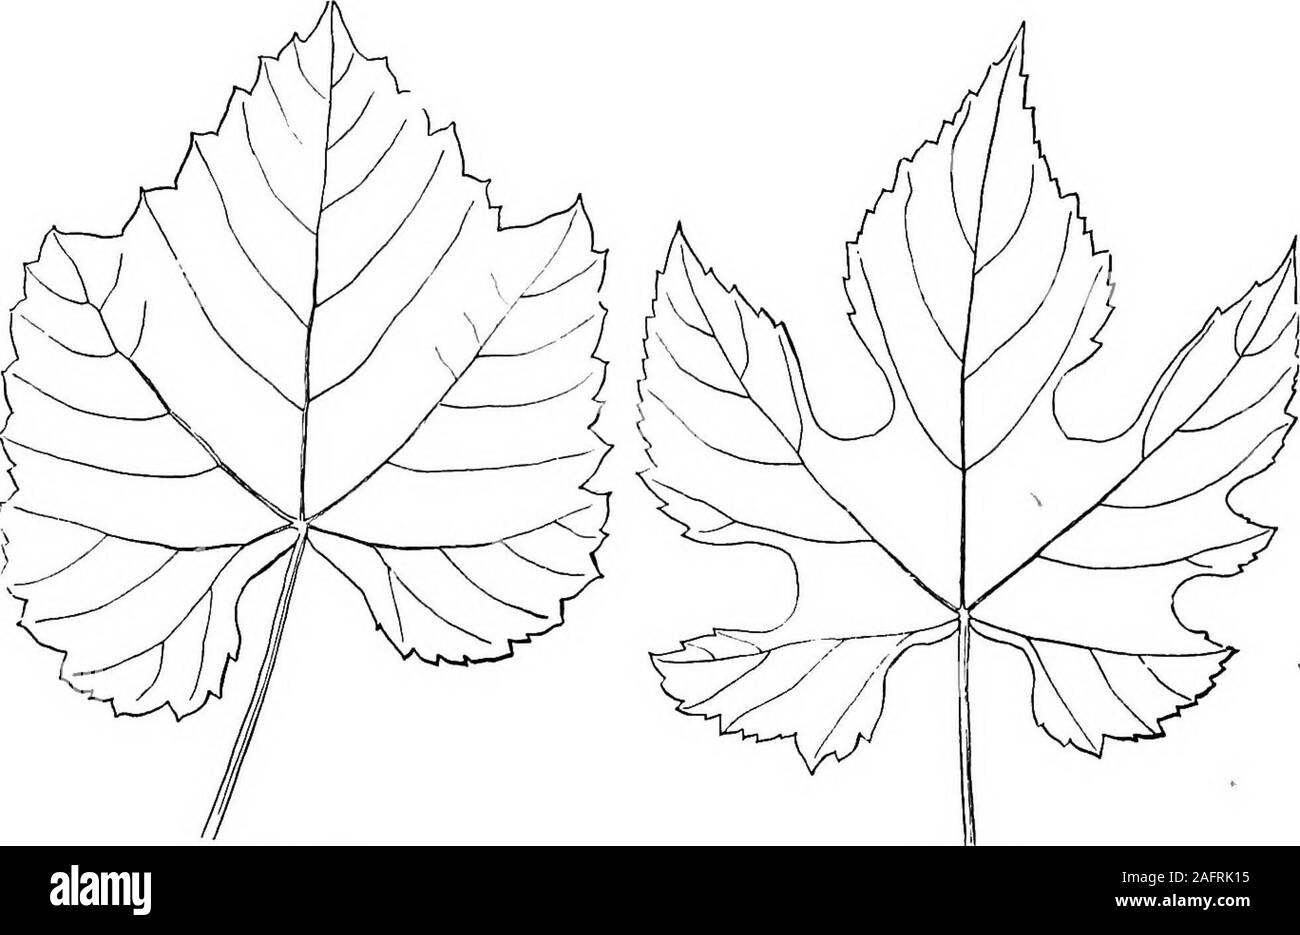 . Lessons with plants. Suggestions for seeing and interpreting some of the common forms of vegetation. Fio. 79.Virginia creeper. occurs in some plants (as in some of the vetches), inwhich the entire foliage is made up of large stipules. 88a. Some of the members in Fig. 63 are probably leaf-like stipules.A leaf which has no petiole is said to be sessile (». e., sittingJ, aterm applied to any member which is destitute of a stalk or stem. 89. How shall we define the parts in the leaf of 84 LESSONS WITH PLANTS the Virginia creeper (Fig. 79)? The petiole isplain; but shall we say that there are fiv Stock Photo